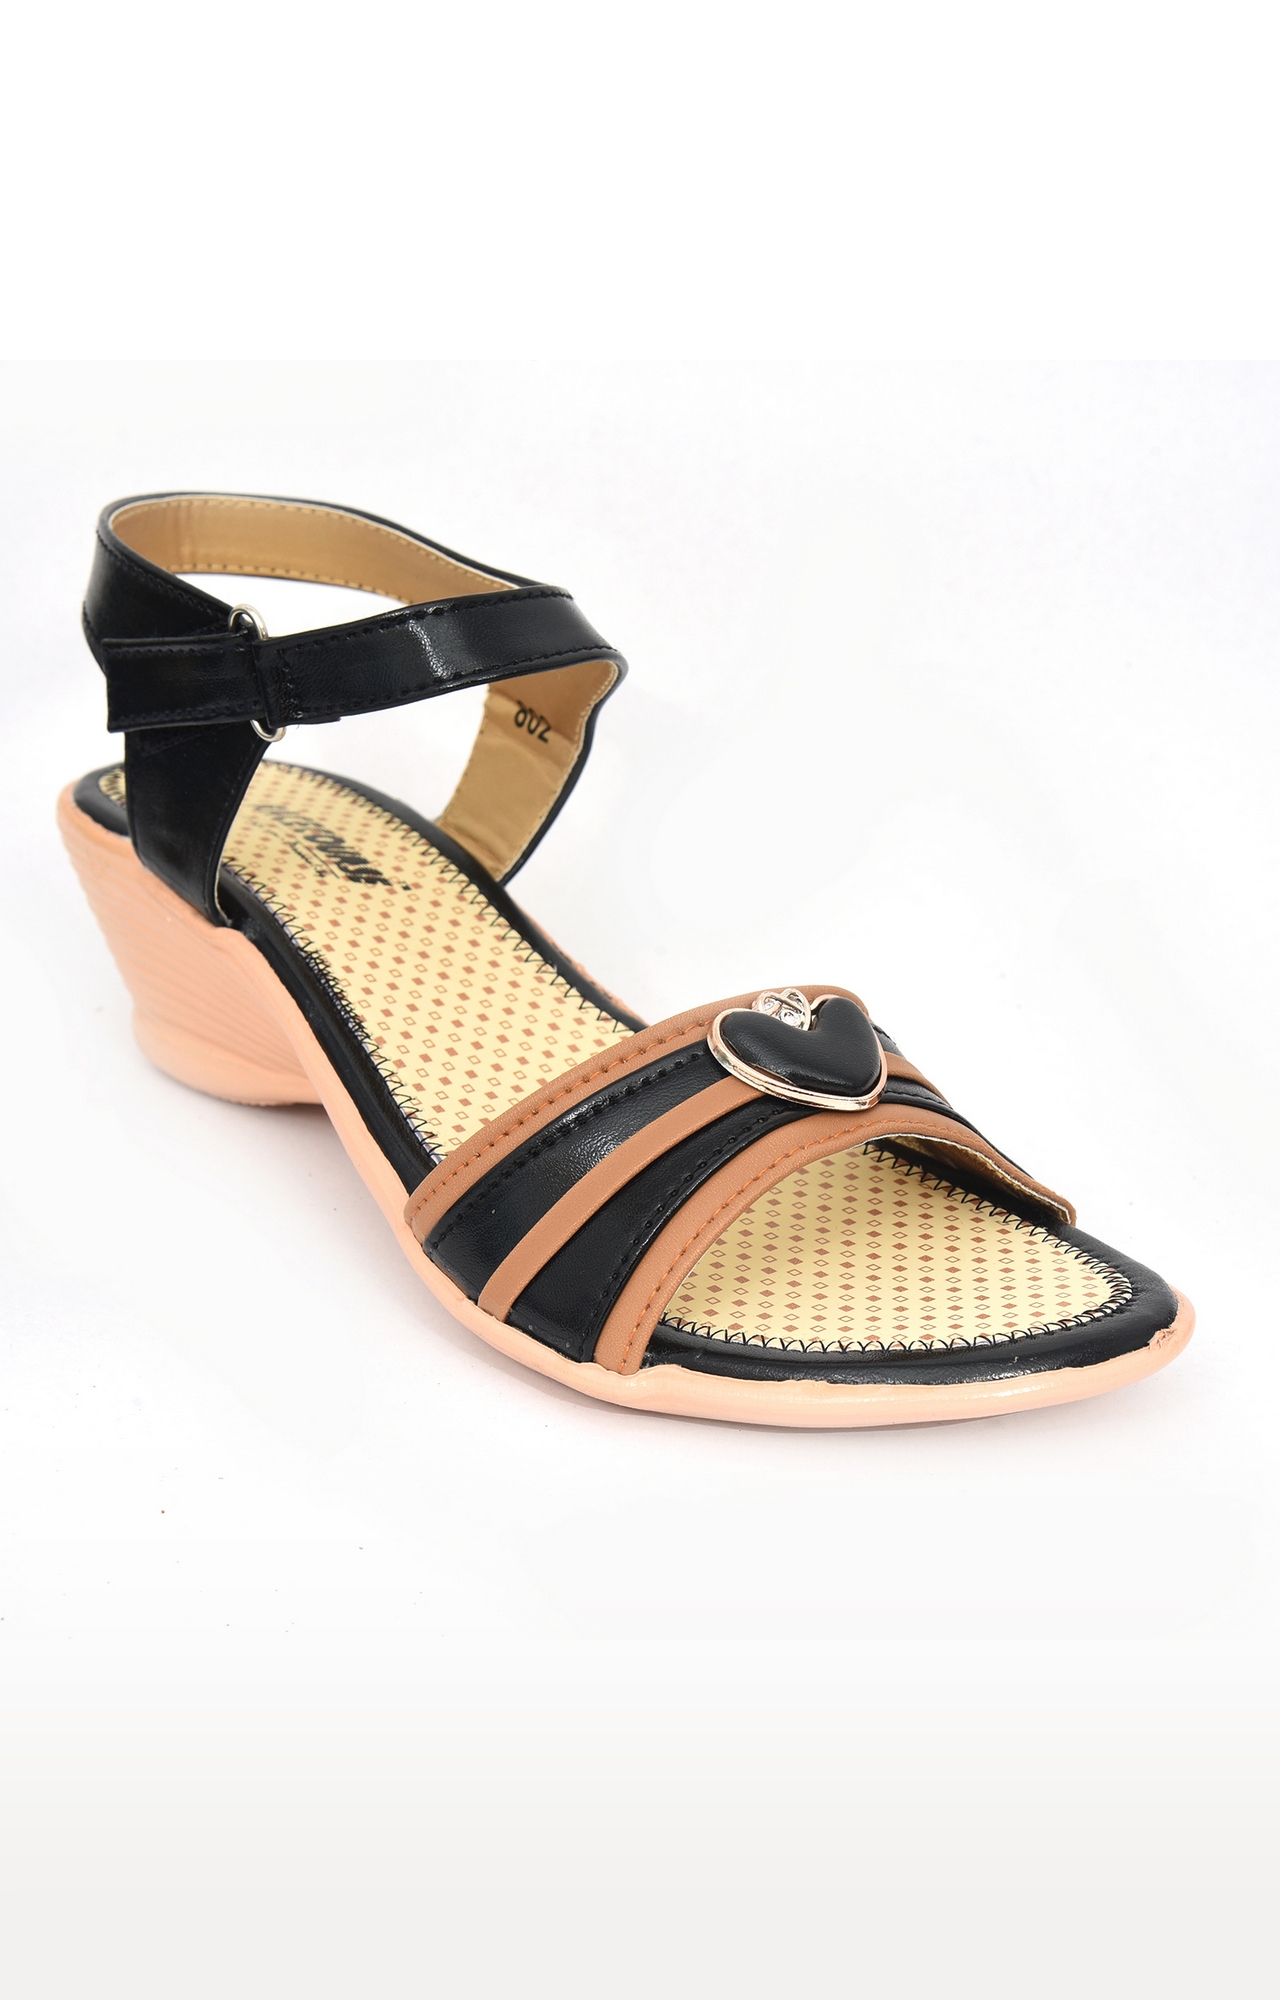 Racecourse | Racecourse Women's Type Sole Wedges Heel Artificial Leather Back Belt Sandal With the Heel Height of 2 Inch 802 Black